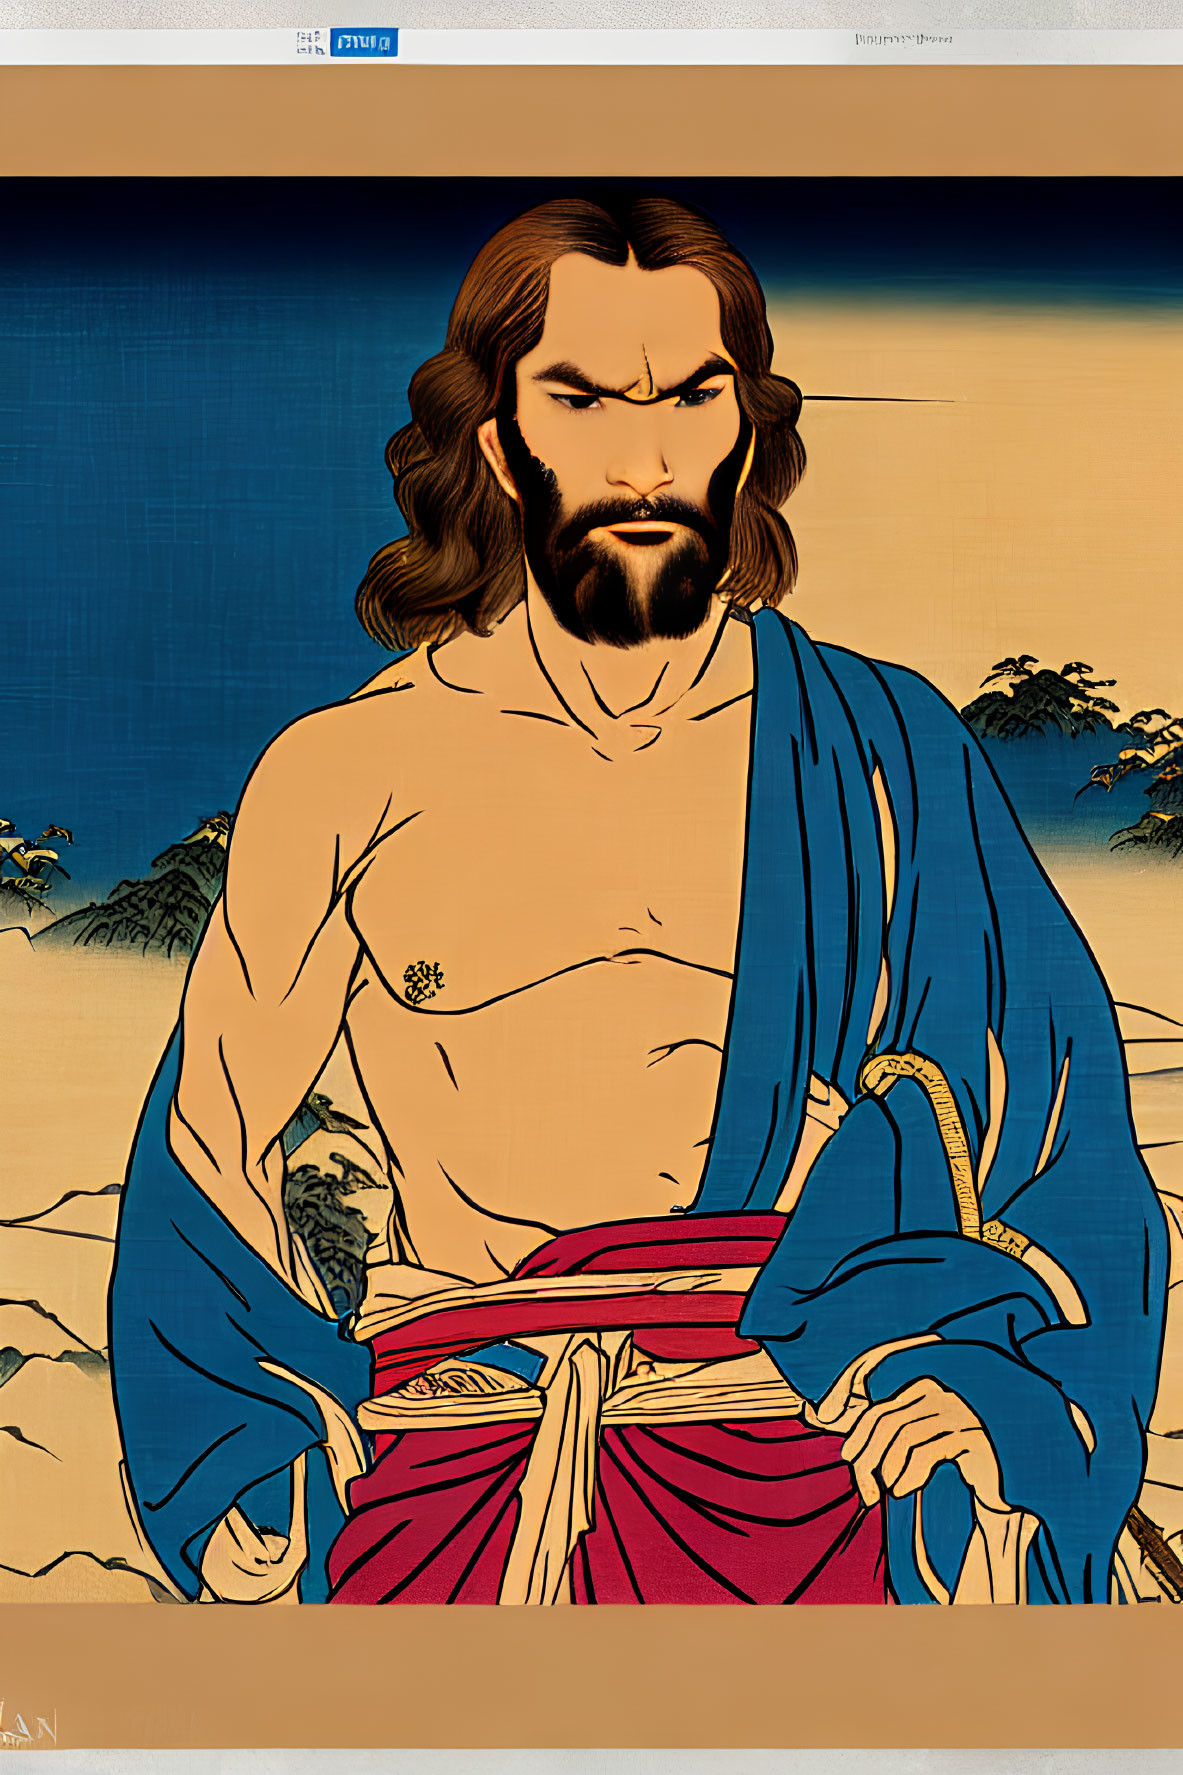 Muscular man with long hair and beard in blue and red traditional outfit against stylized landscape.